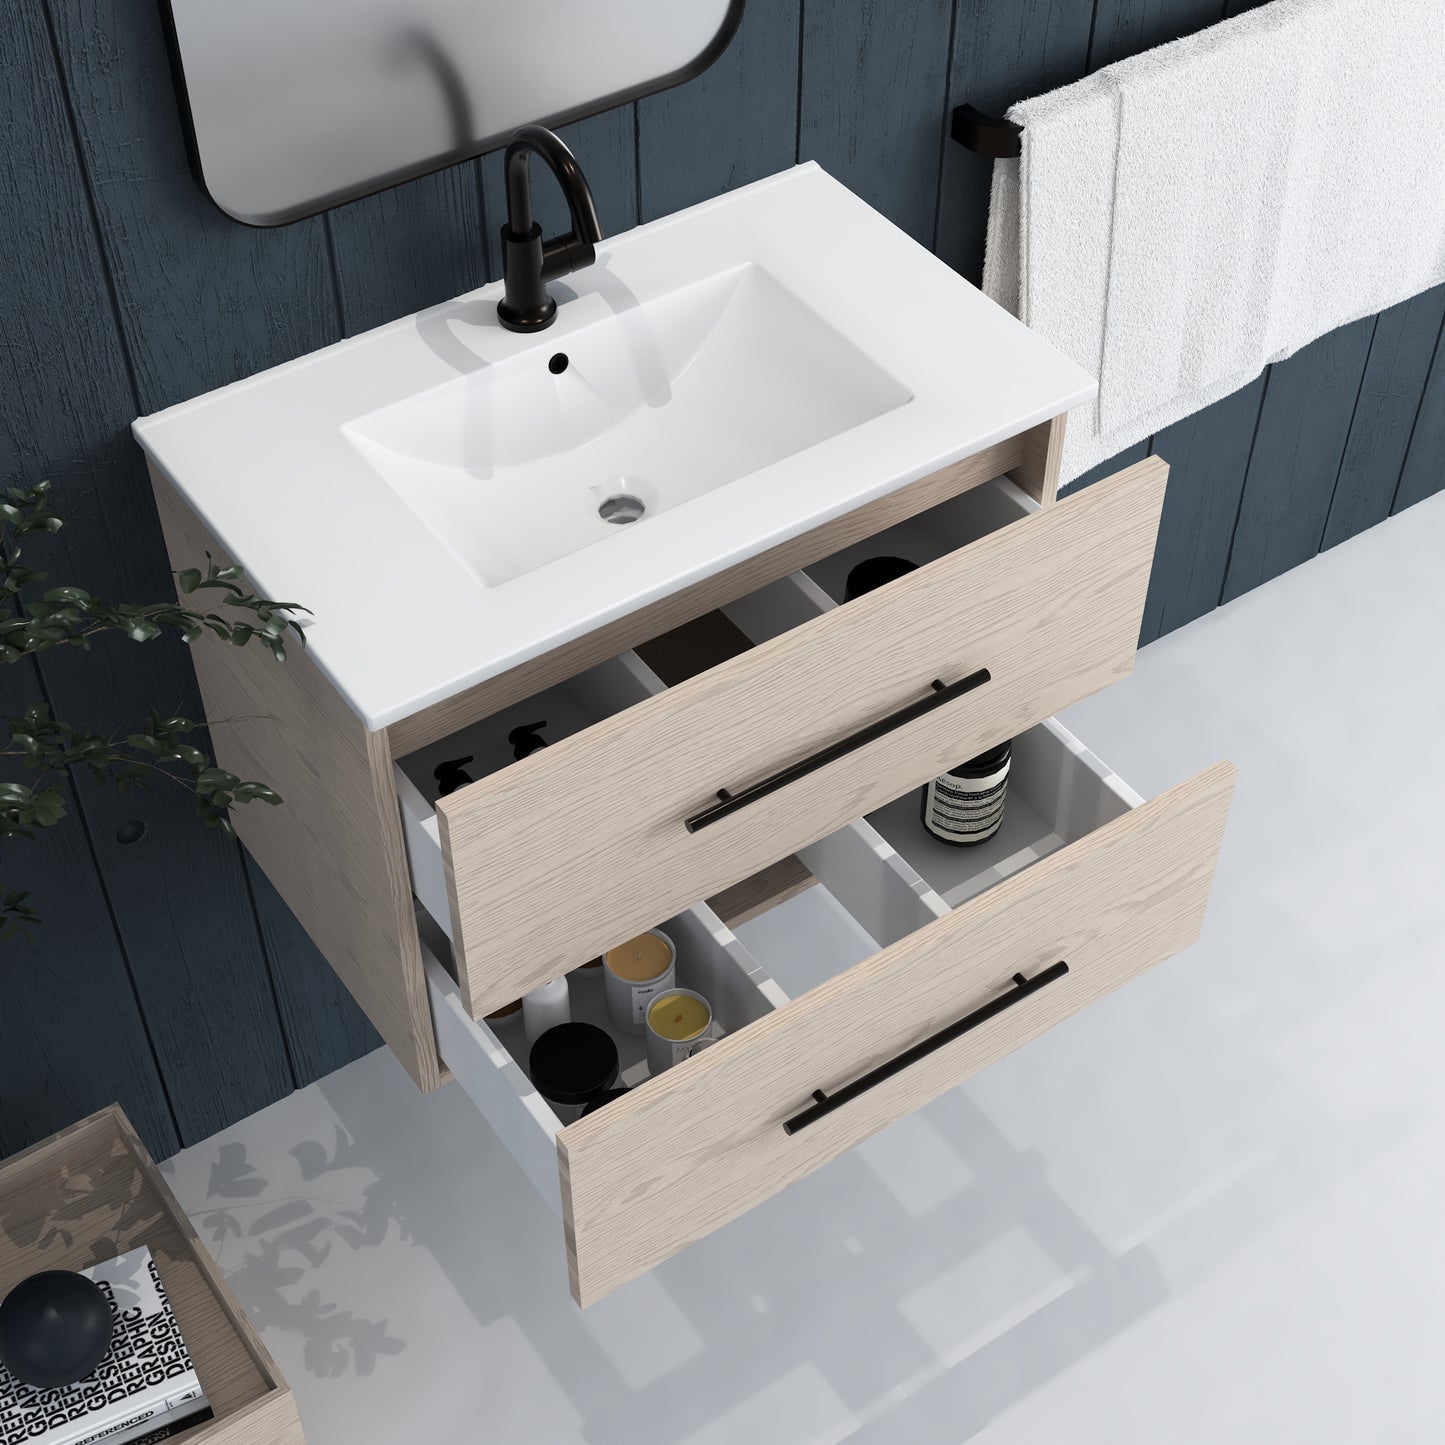 Napa 30" Bathroom Vanity with integrated counter top